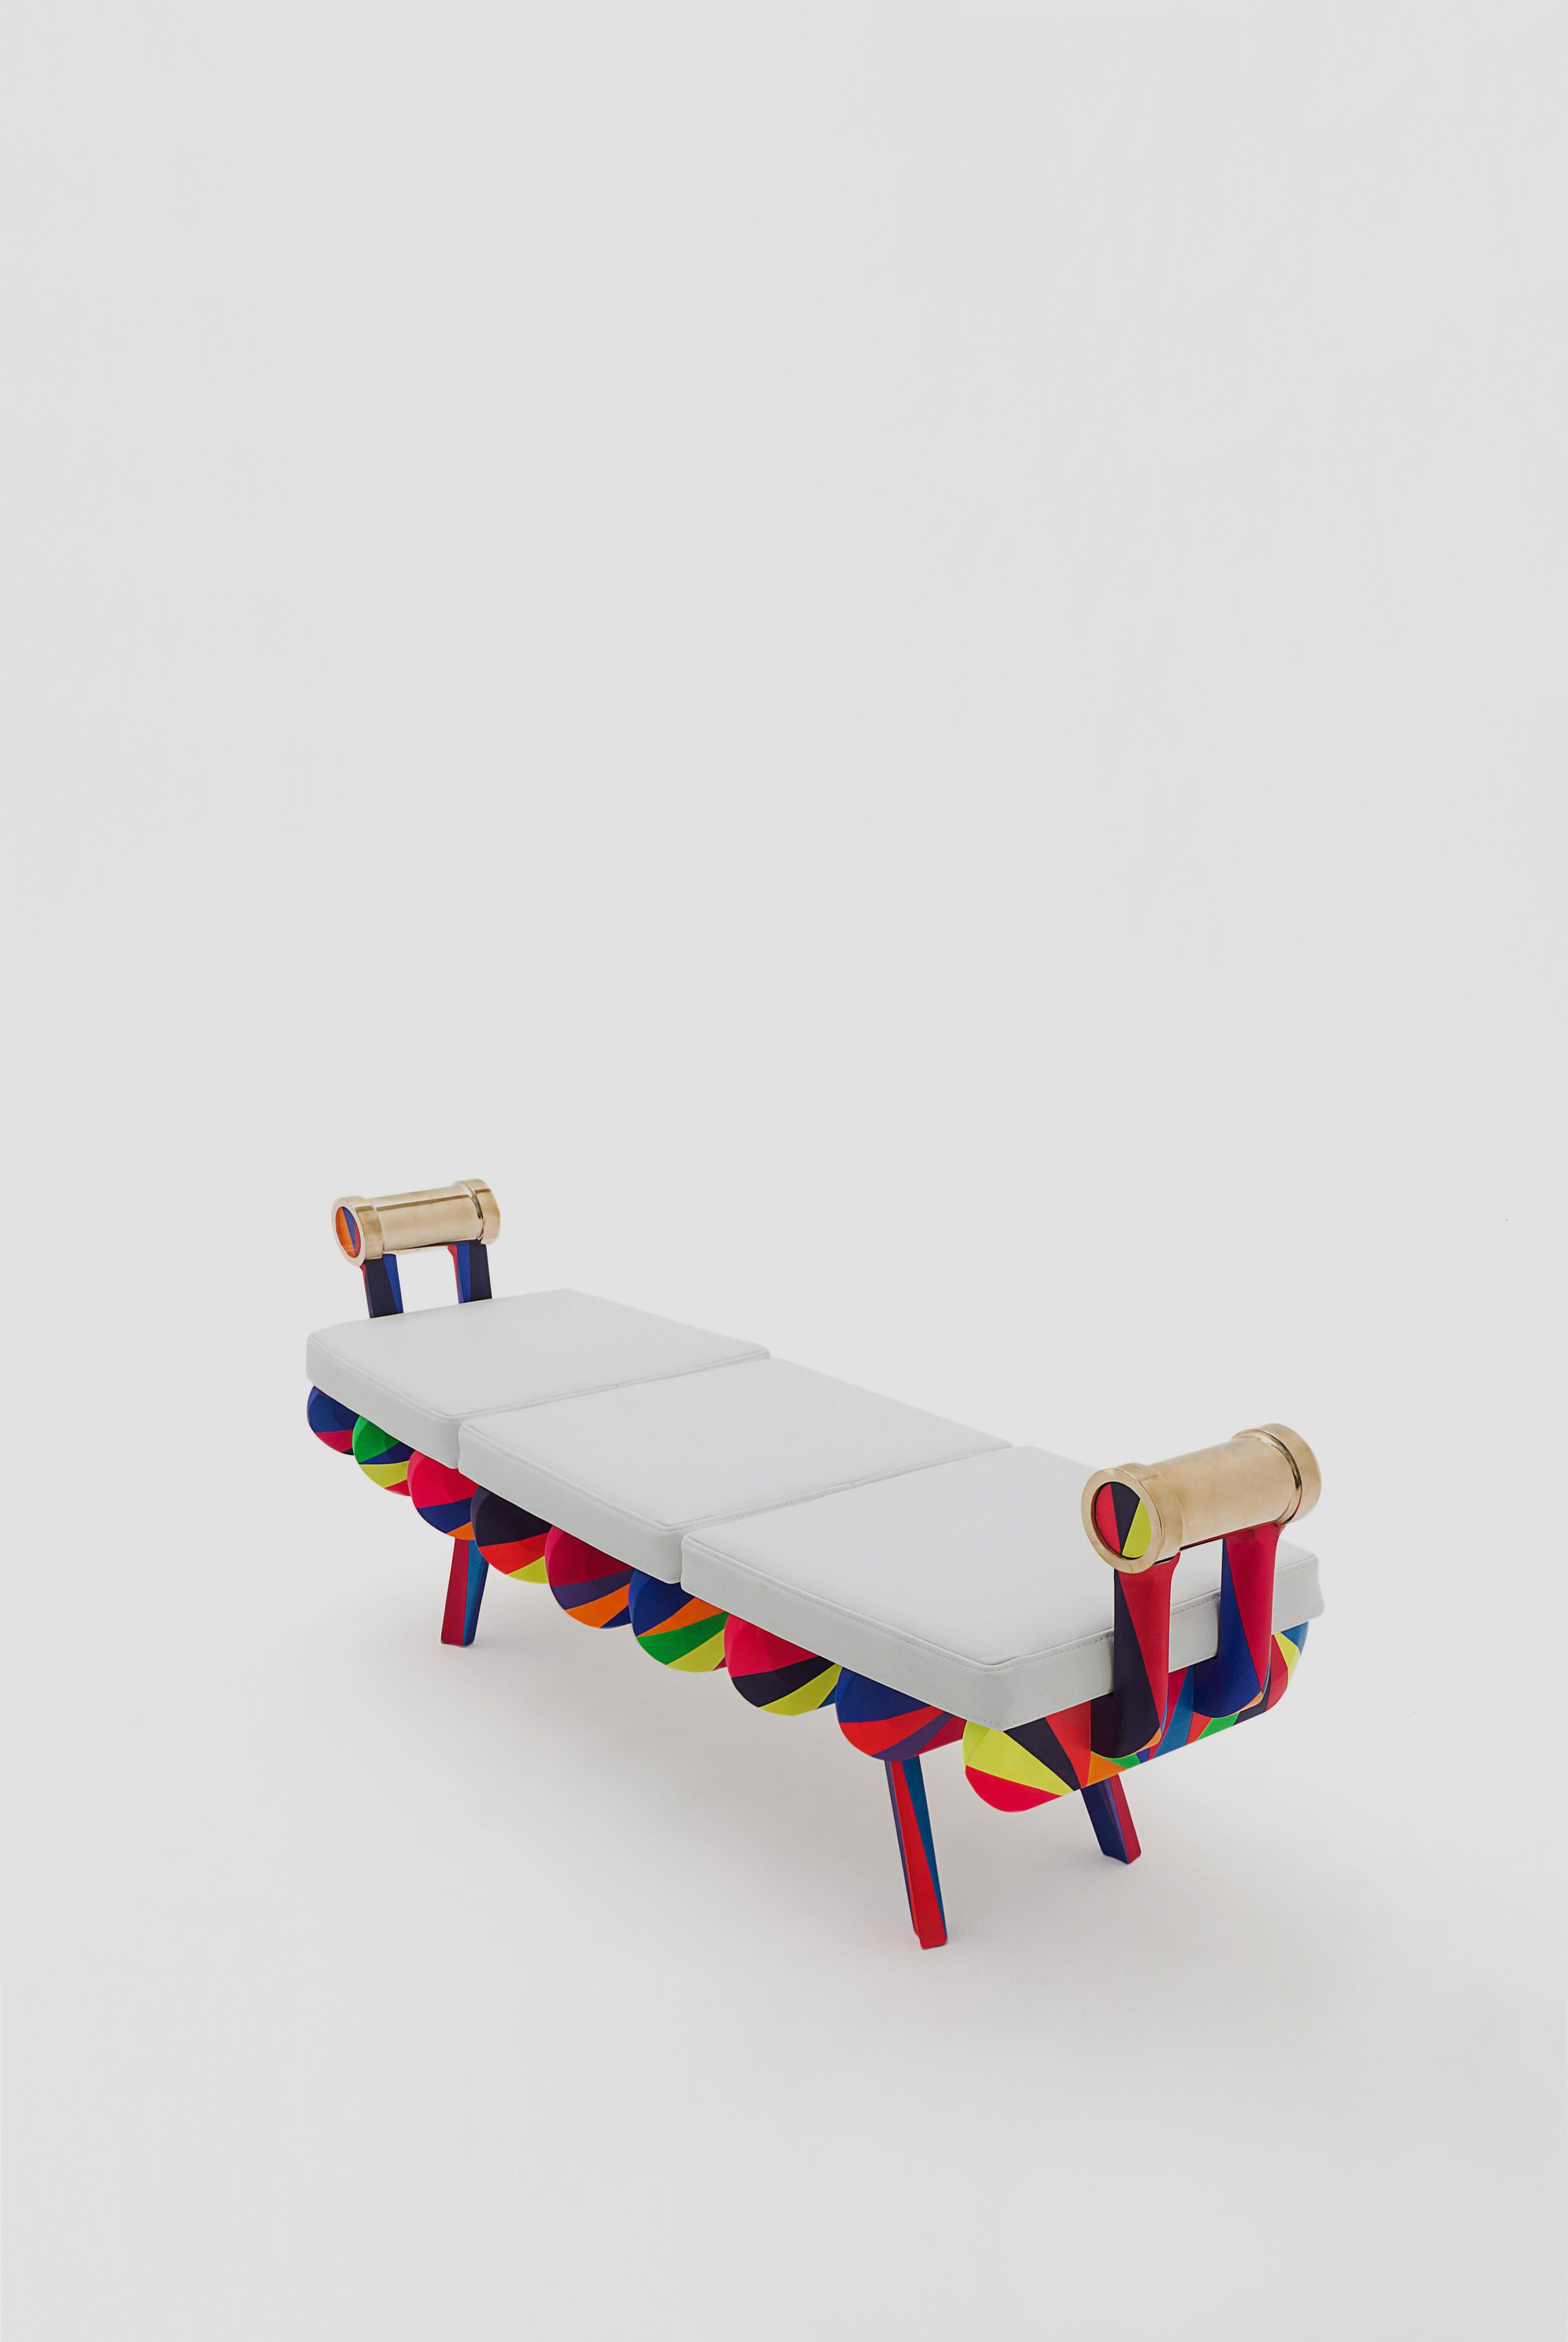 Gor is a bench designed by Arturo Verástegui for BREUR ESTUDIO, and intervened by Lao Gabrielli. This piece is part of Arte y Ebanistería, BREUR ESTUDIO third collection, in which they collaborated with top artists to achieve exceptional